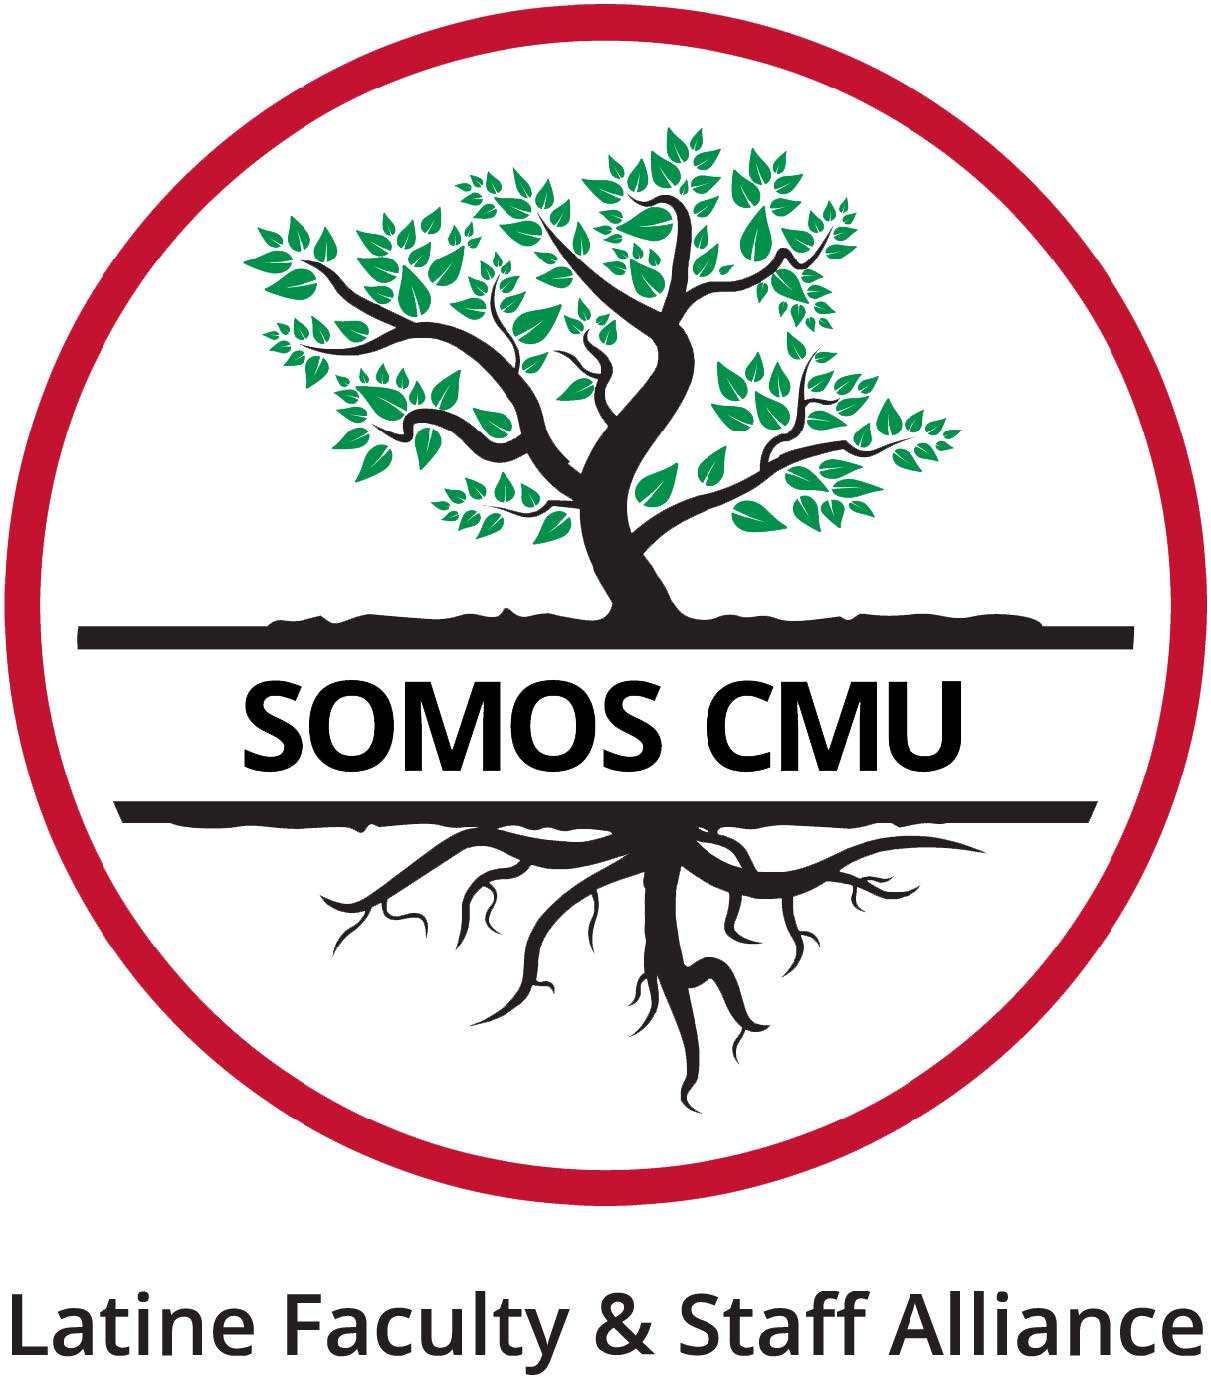 Latine Faculty and Staff Alliance logo of a green tree with black trunk and roots surrounded by a red circle and including the words Somos CMU 